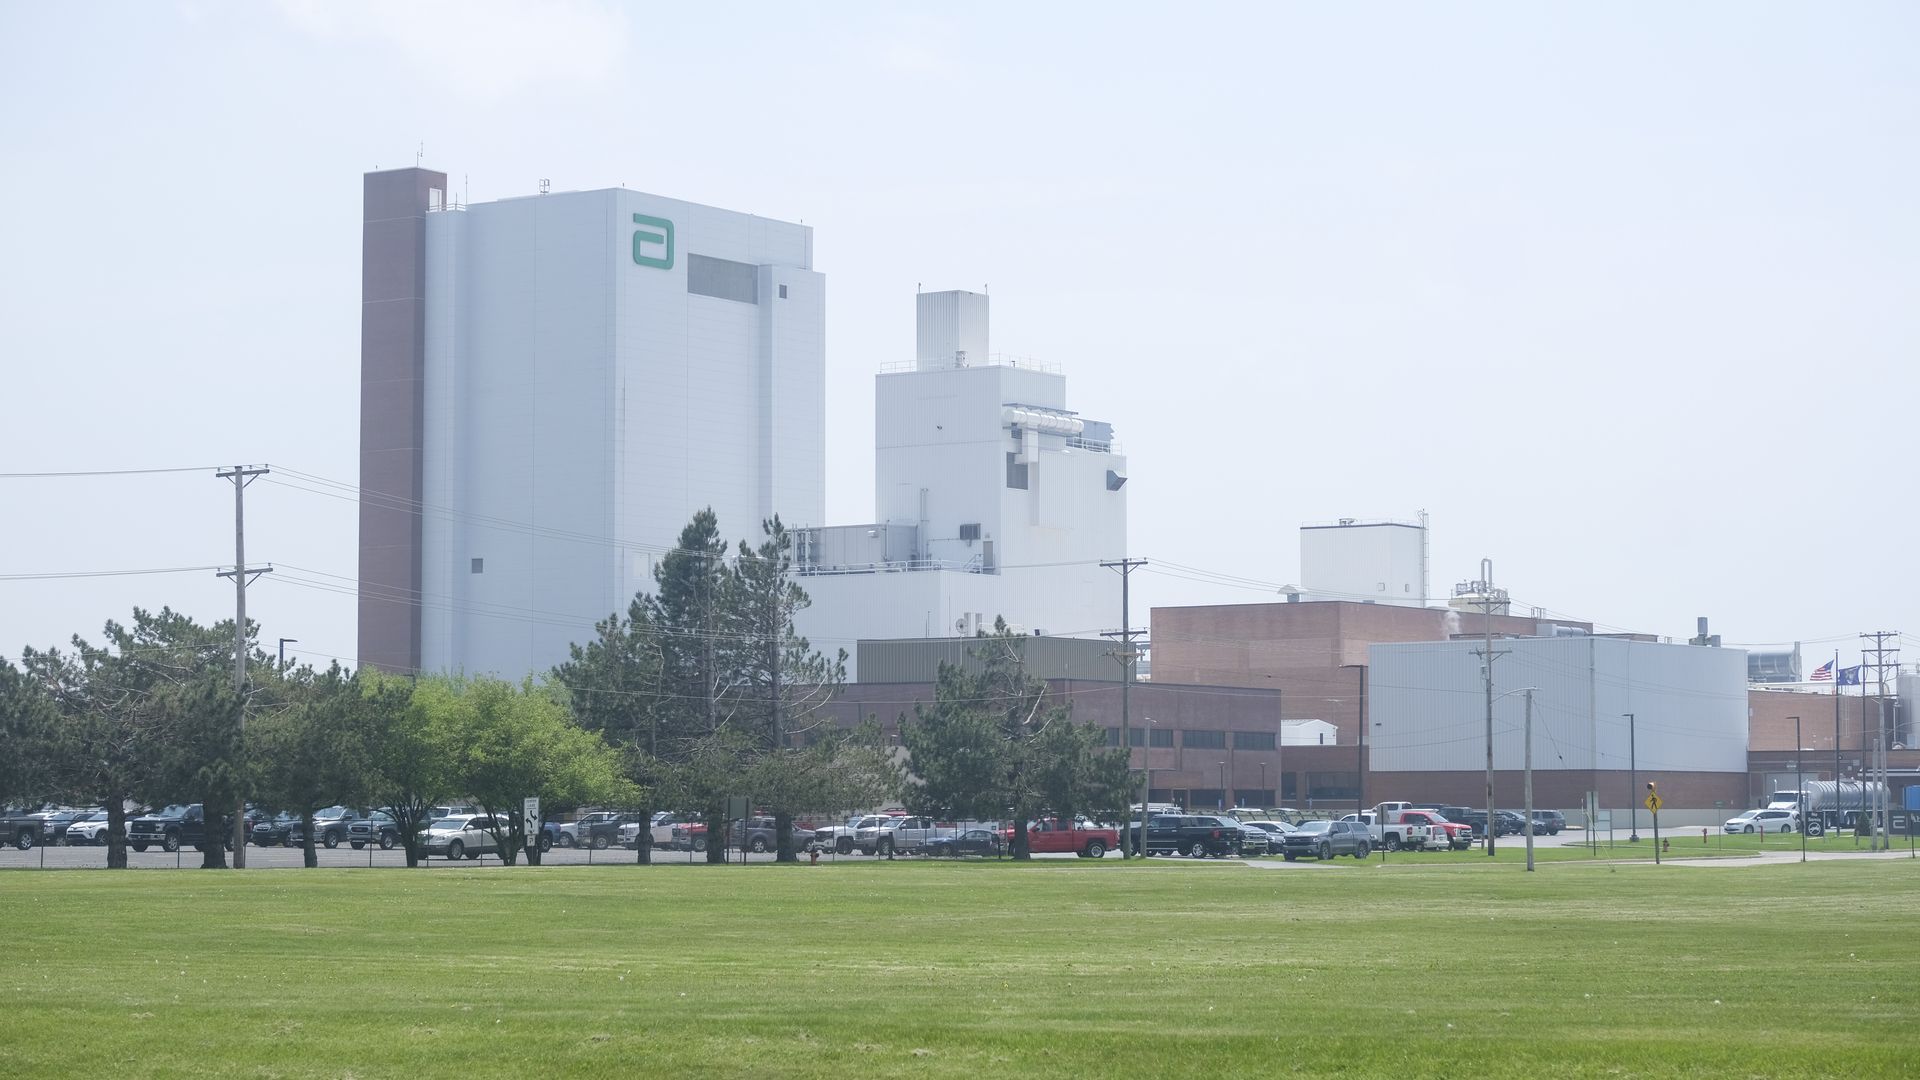 The Abbott Nutrition factory in Sturgis, Michigan, in May 2022.